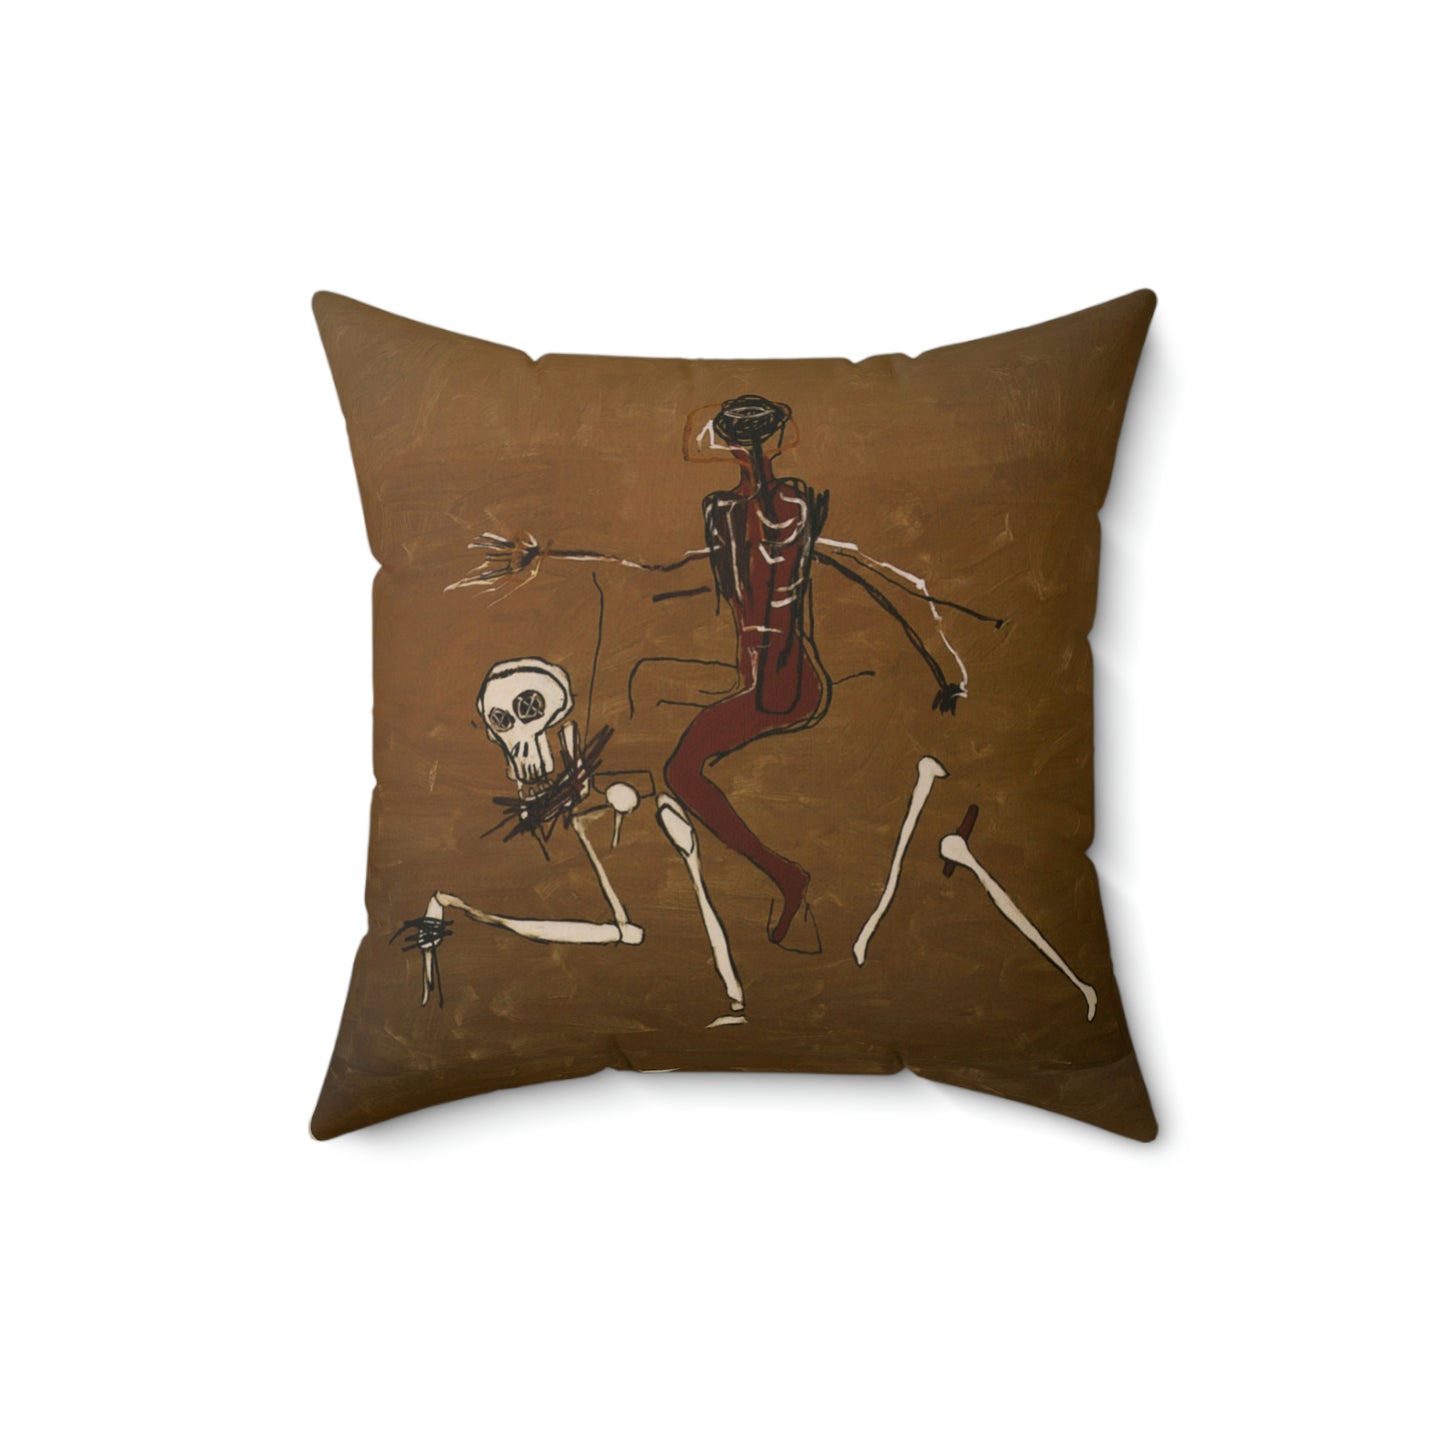 Jean-Michel Basquiat "Riding With Death" Artwork Square Throw Pillow